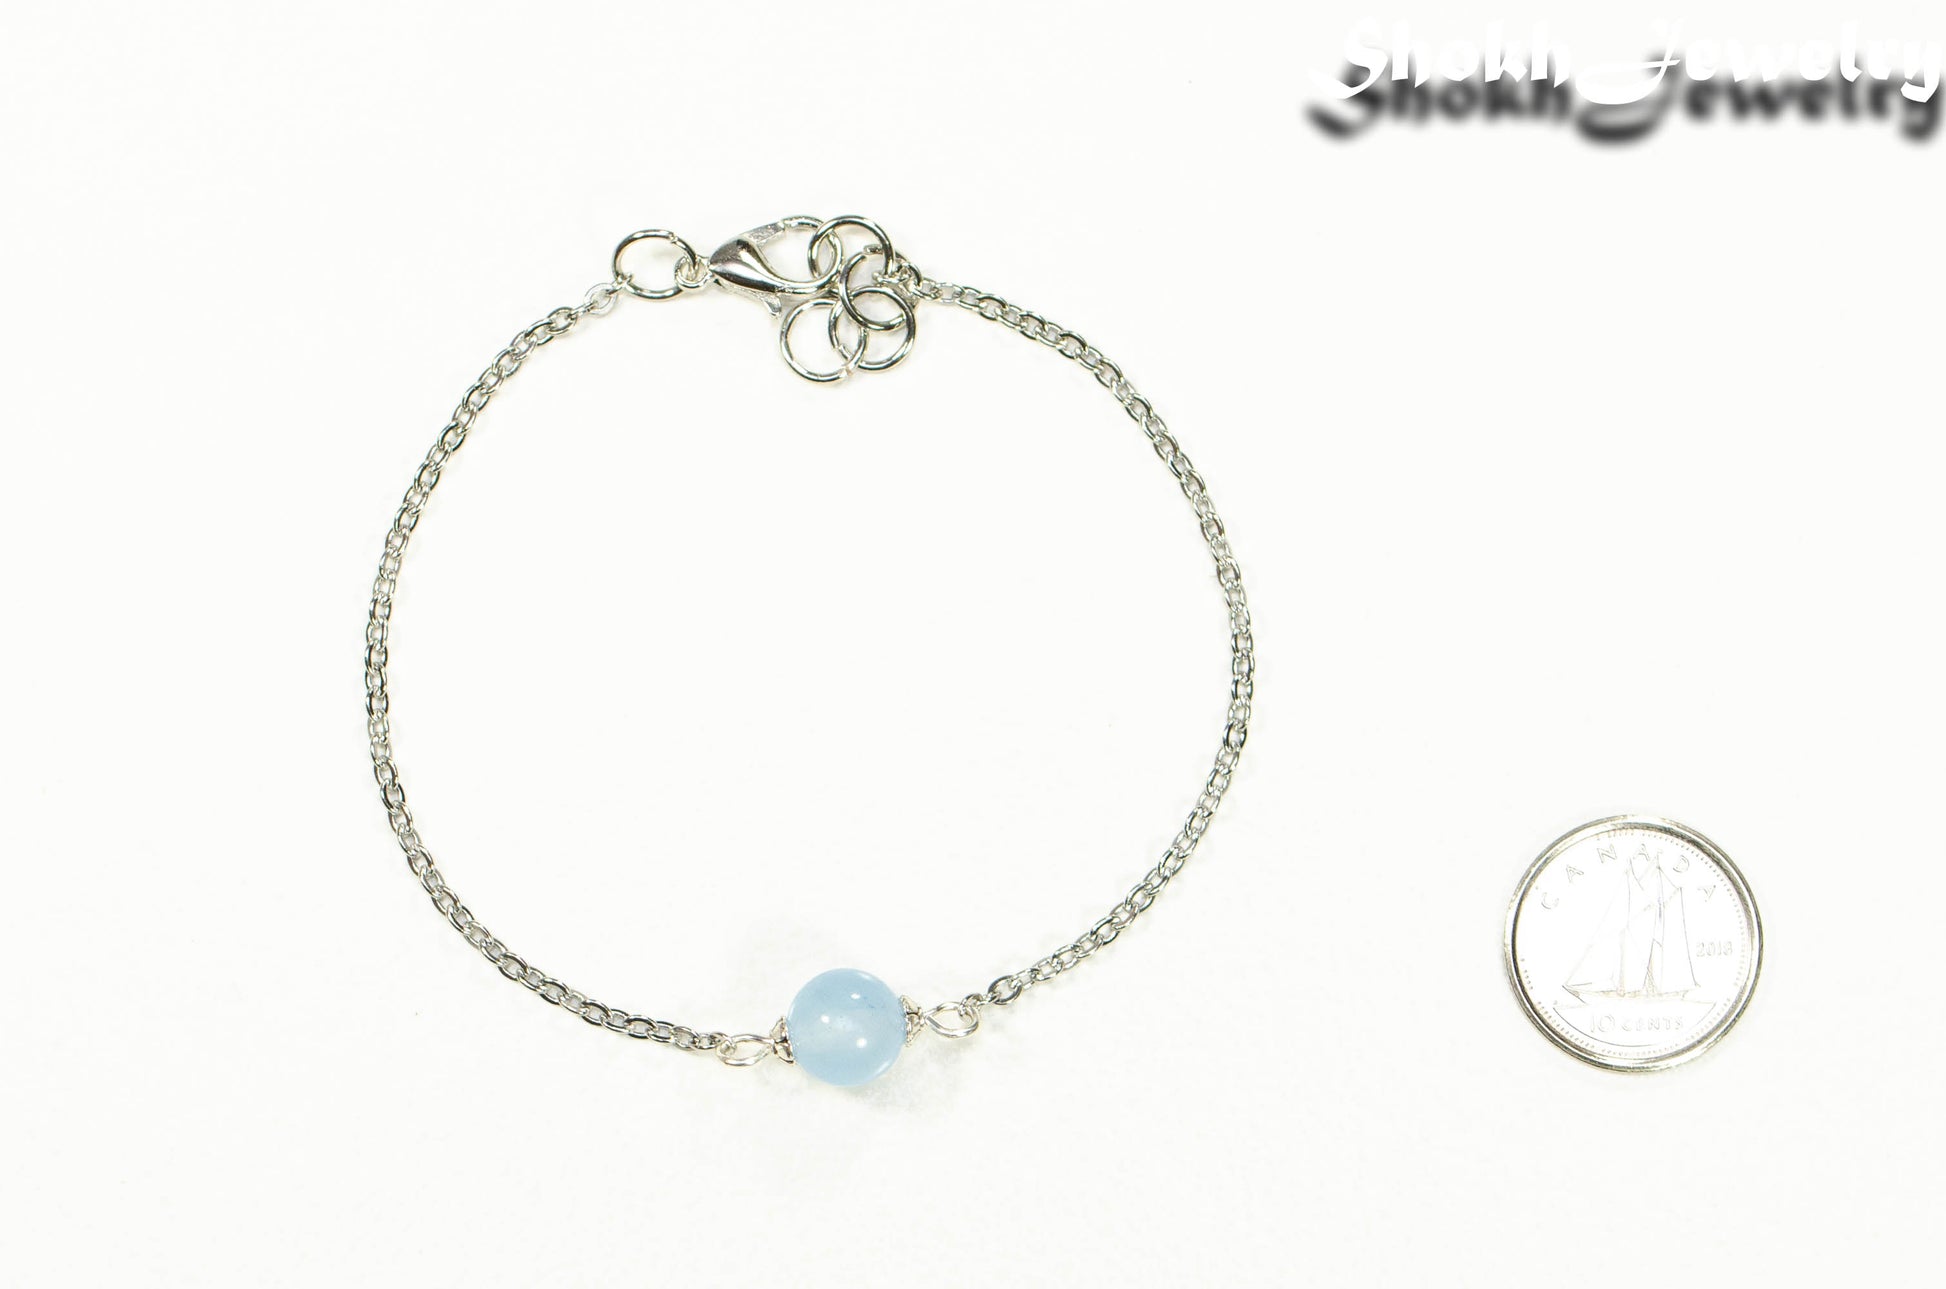 8mm Aquamarine and Chain Anklet beside a dime.